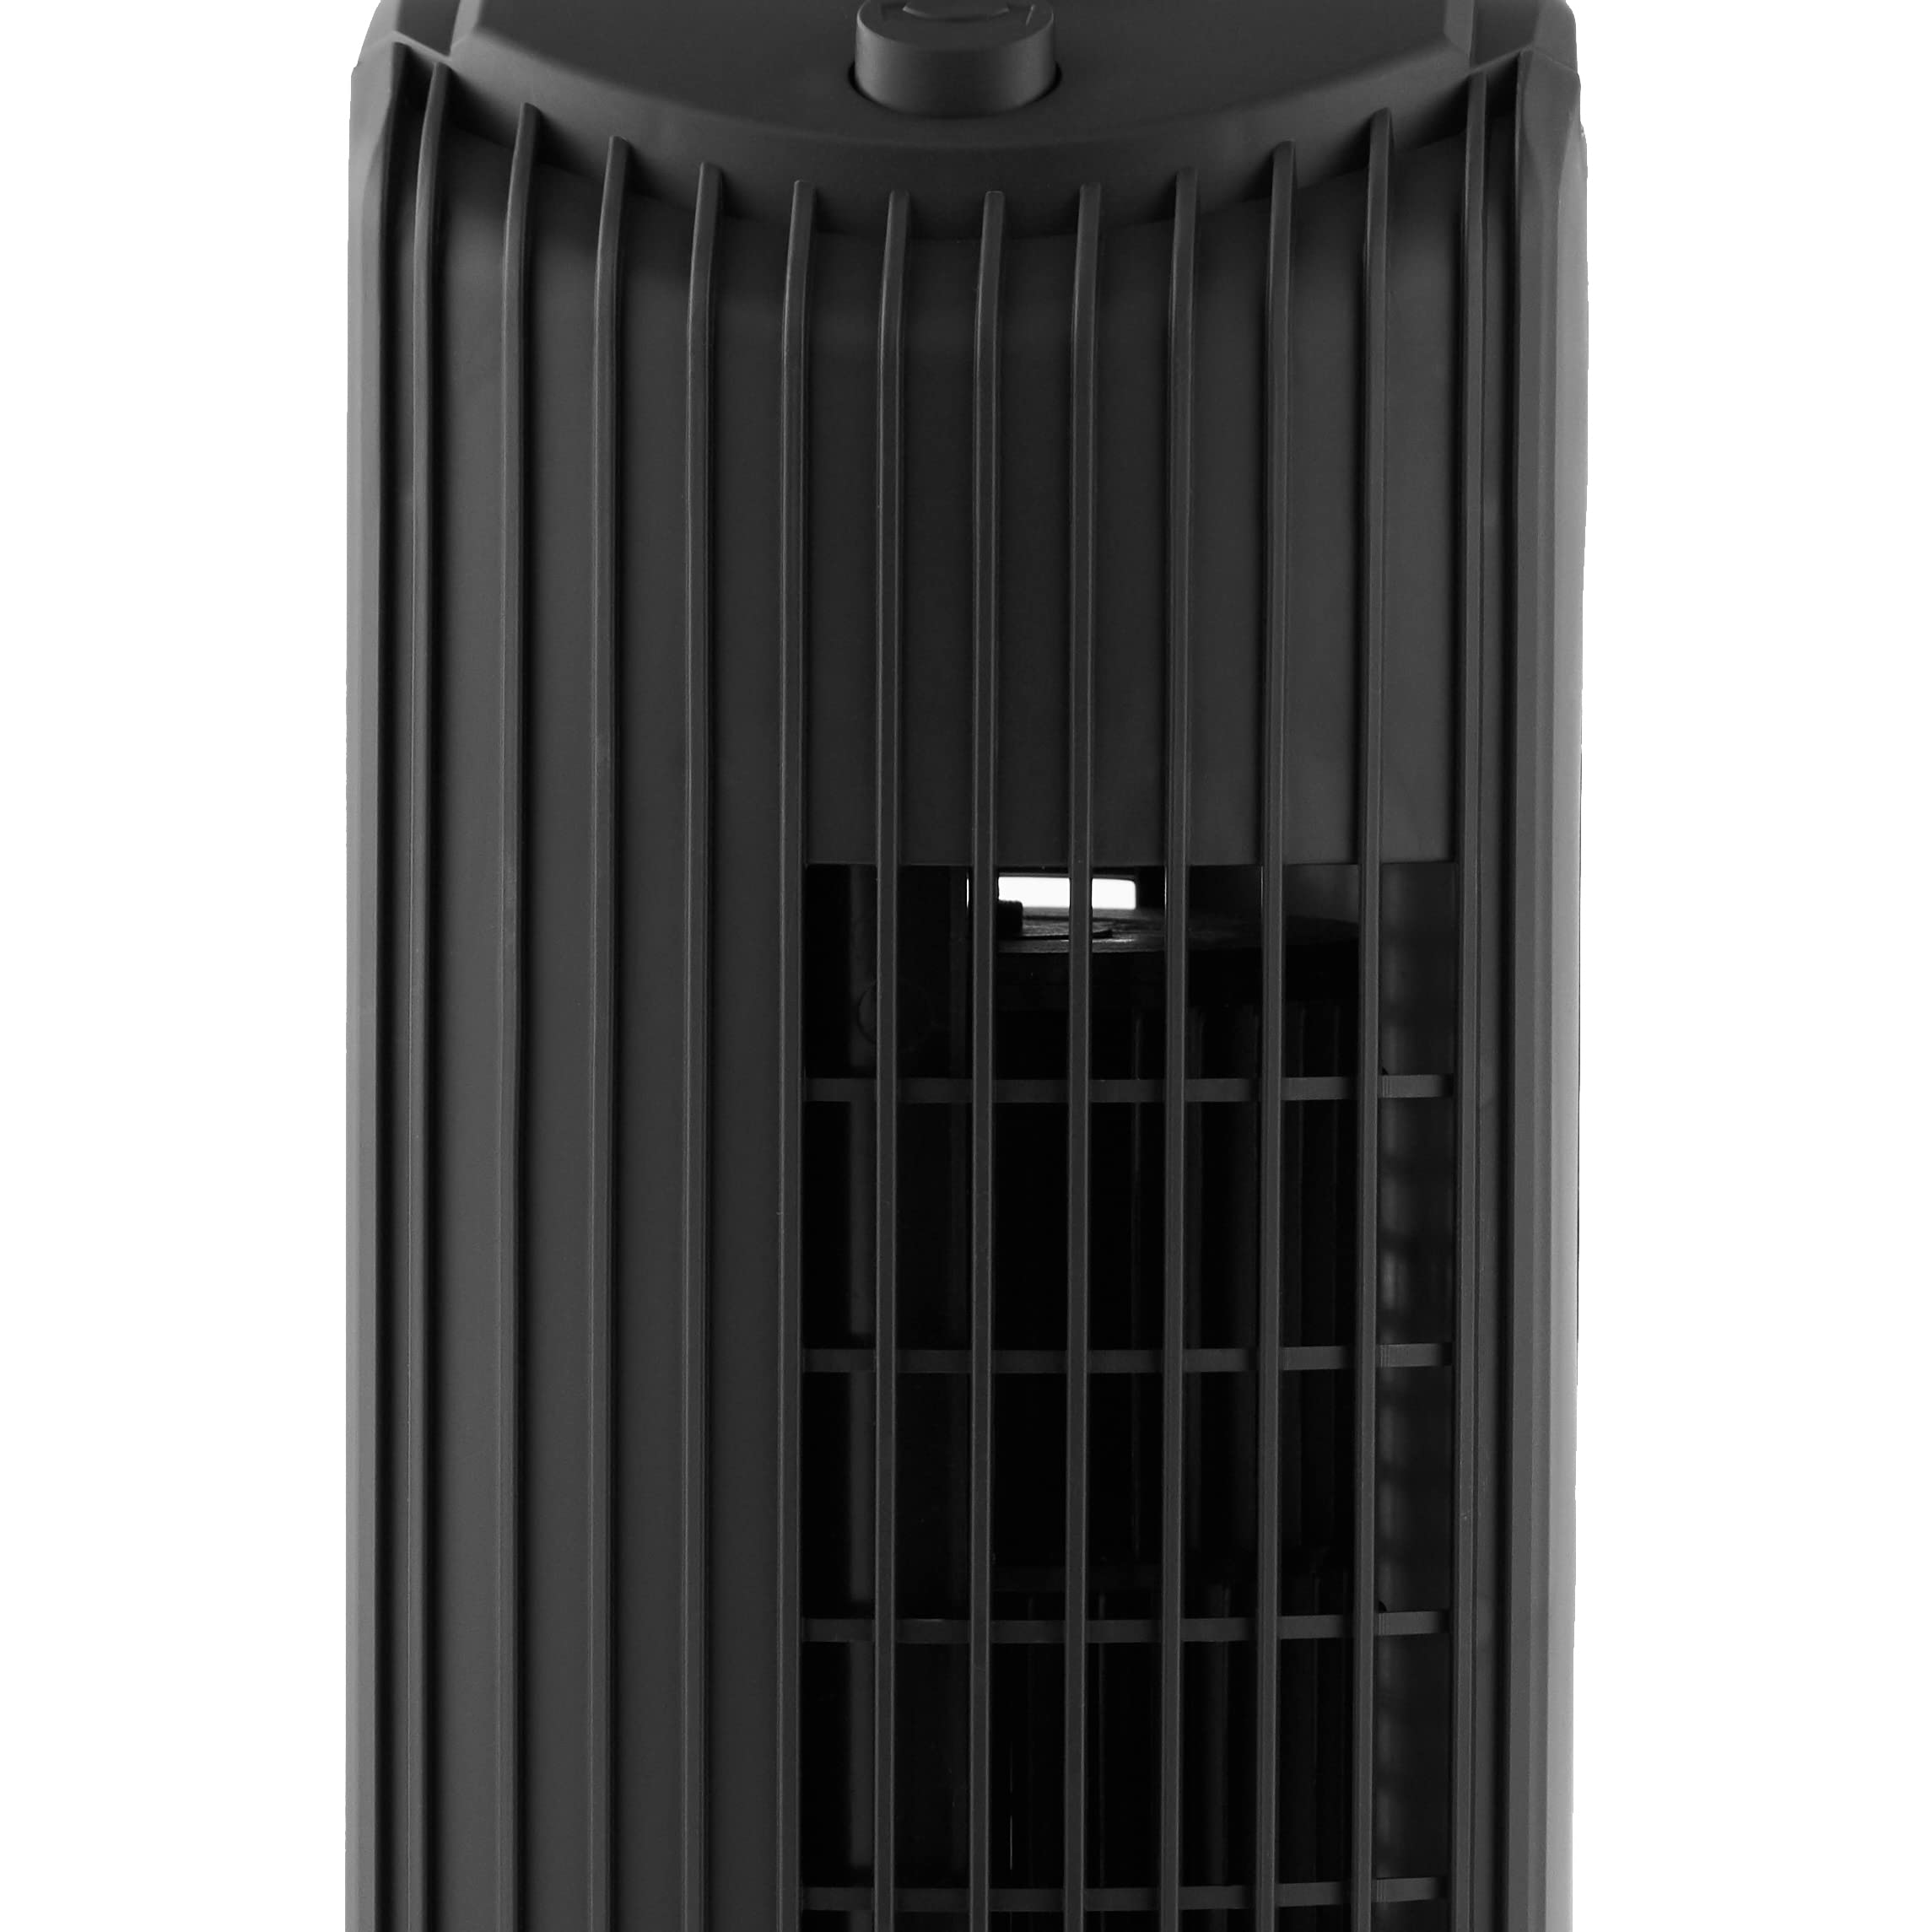 Amazon Basics Manual 3 Speed Oscillating Tower Fan with Mechanical Control, 28 Inch, Black